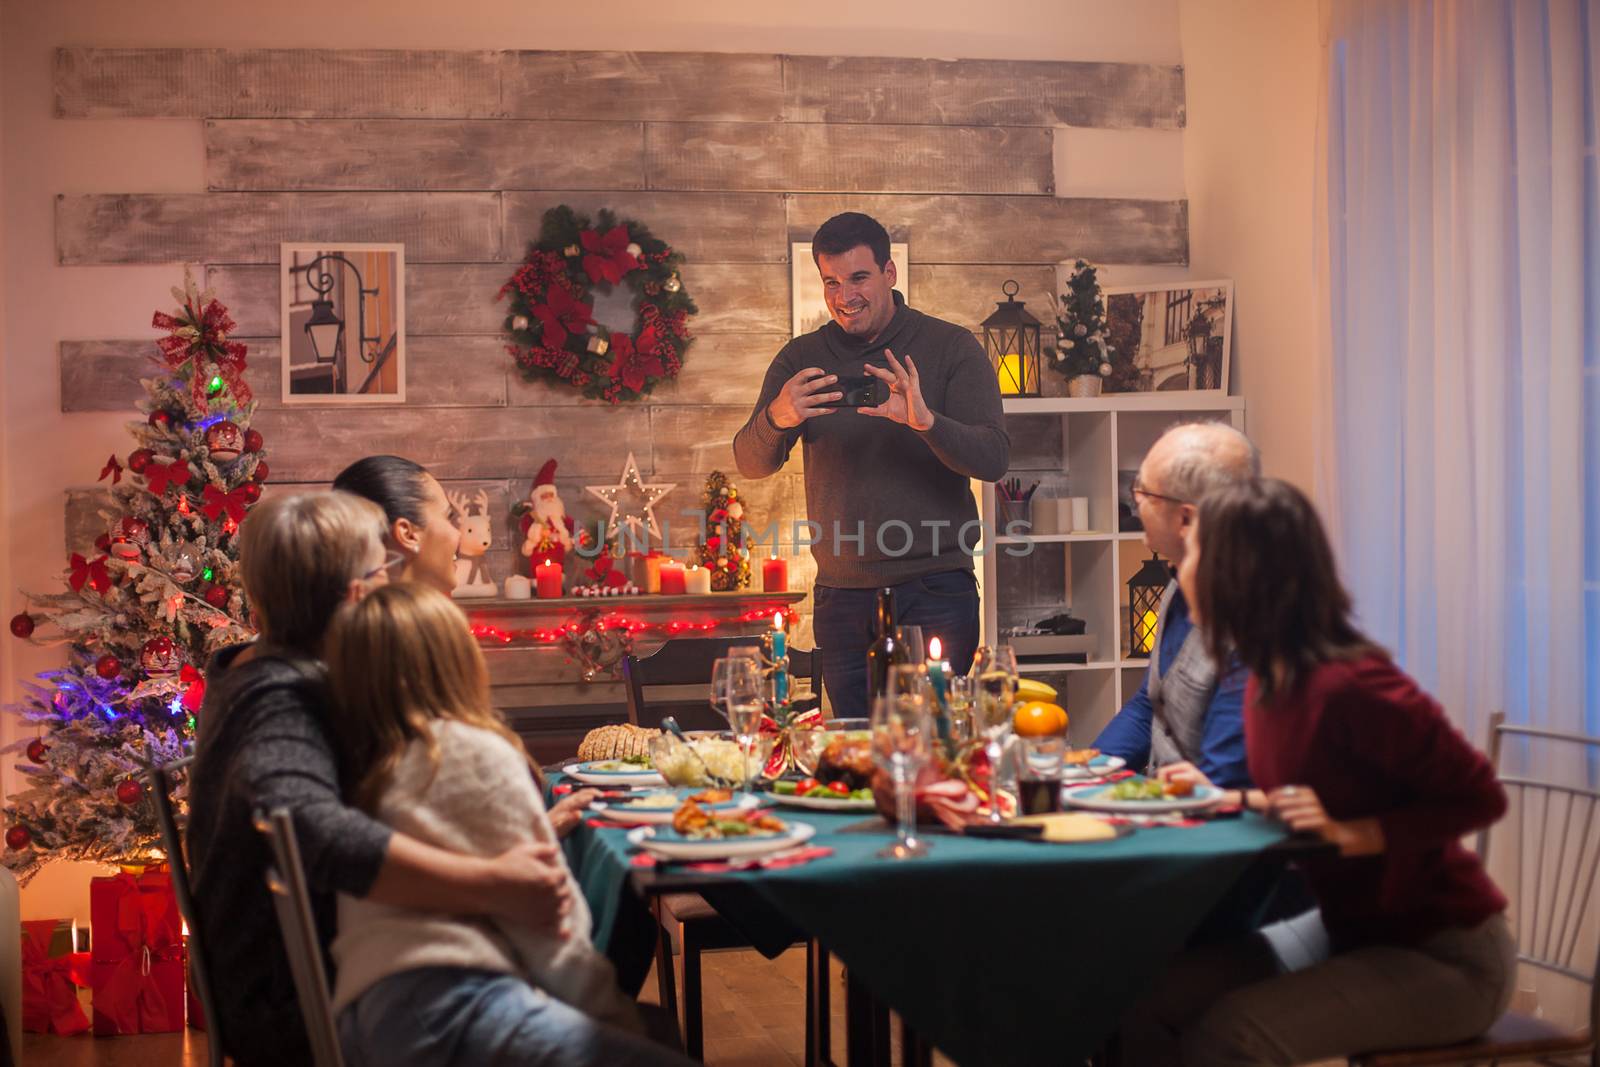 Cheerful man using smartphone to take photos of his family at christmas celebration.